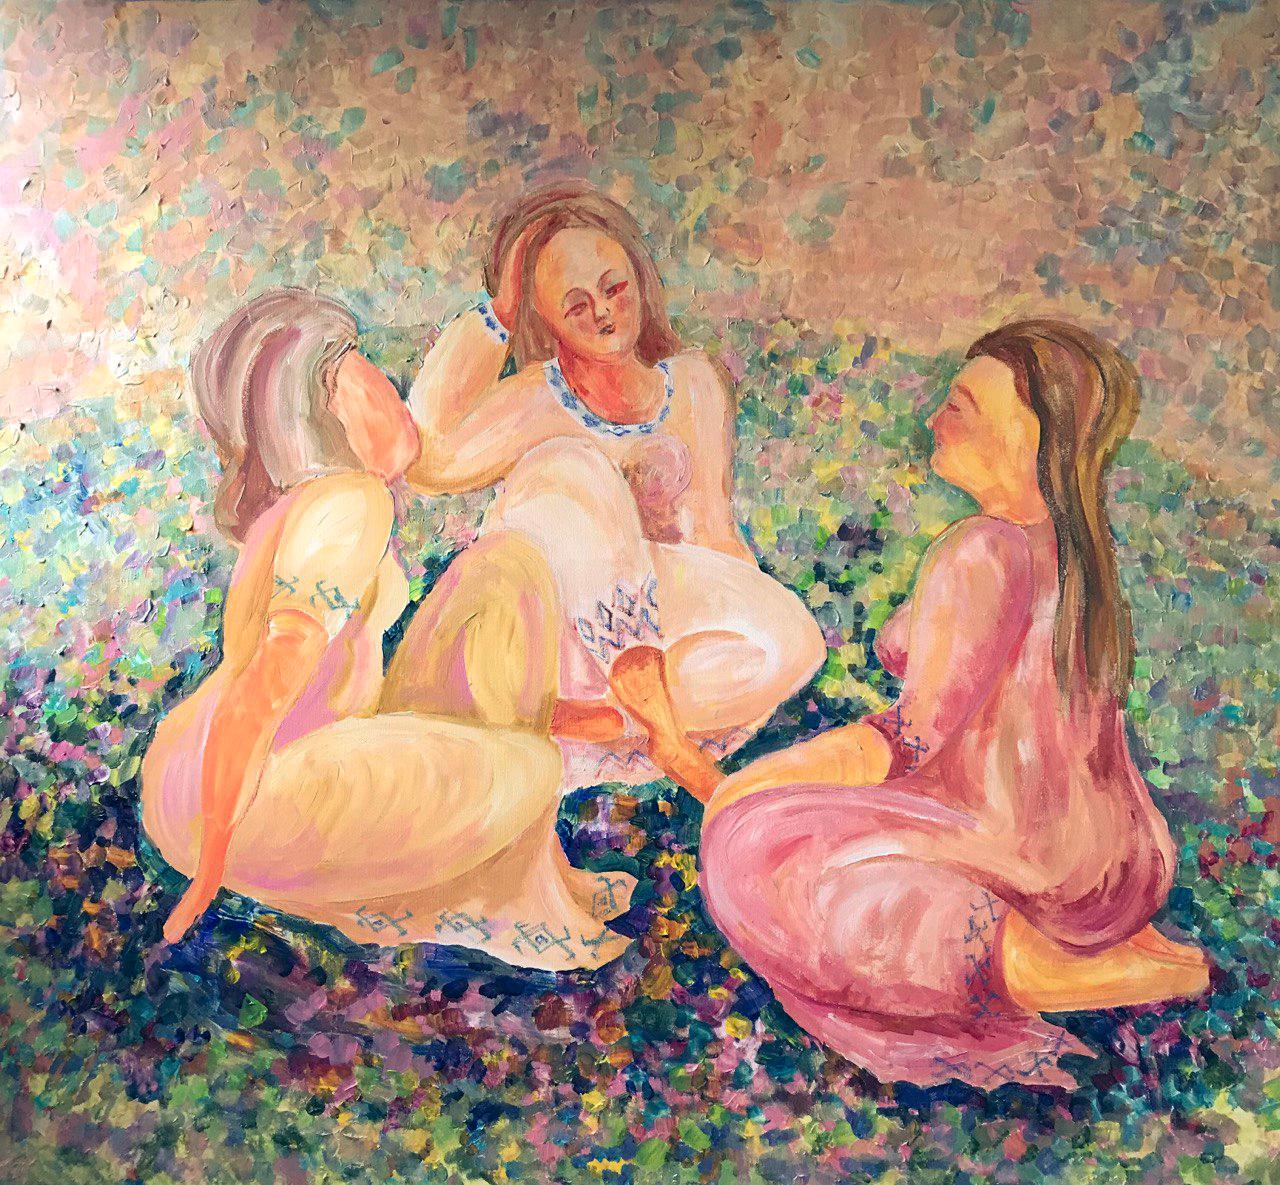 In this latest addition to the "Gardens of Resilience" series, the canvas comes alive with the vibrant presence of three women immersed in dialogue amidst a blossoming meadow. Through intricate patterns adorning their attire, echoes of ancient